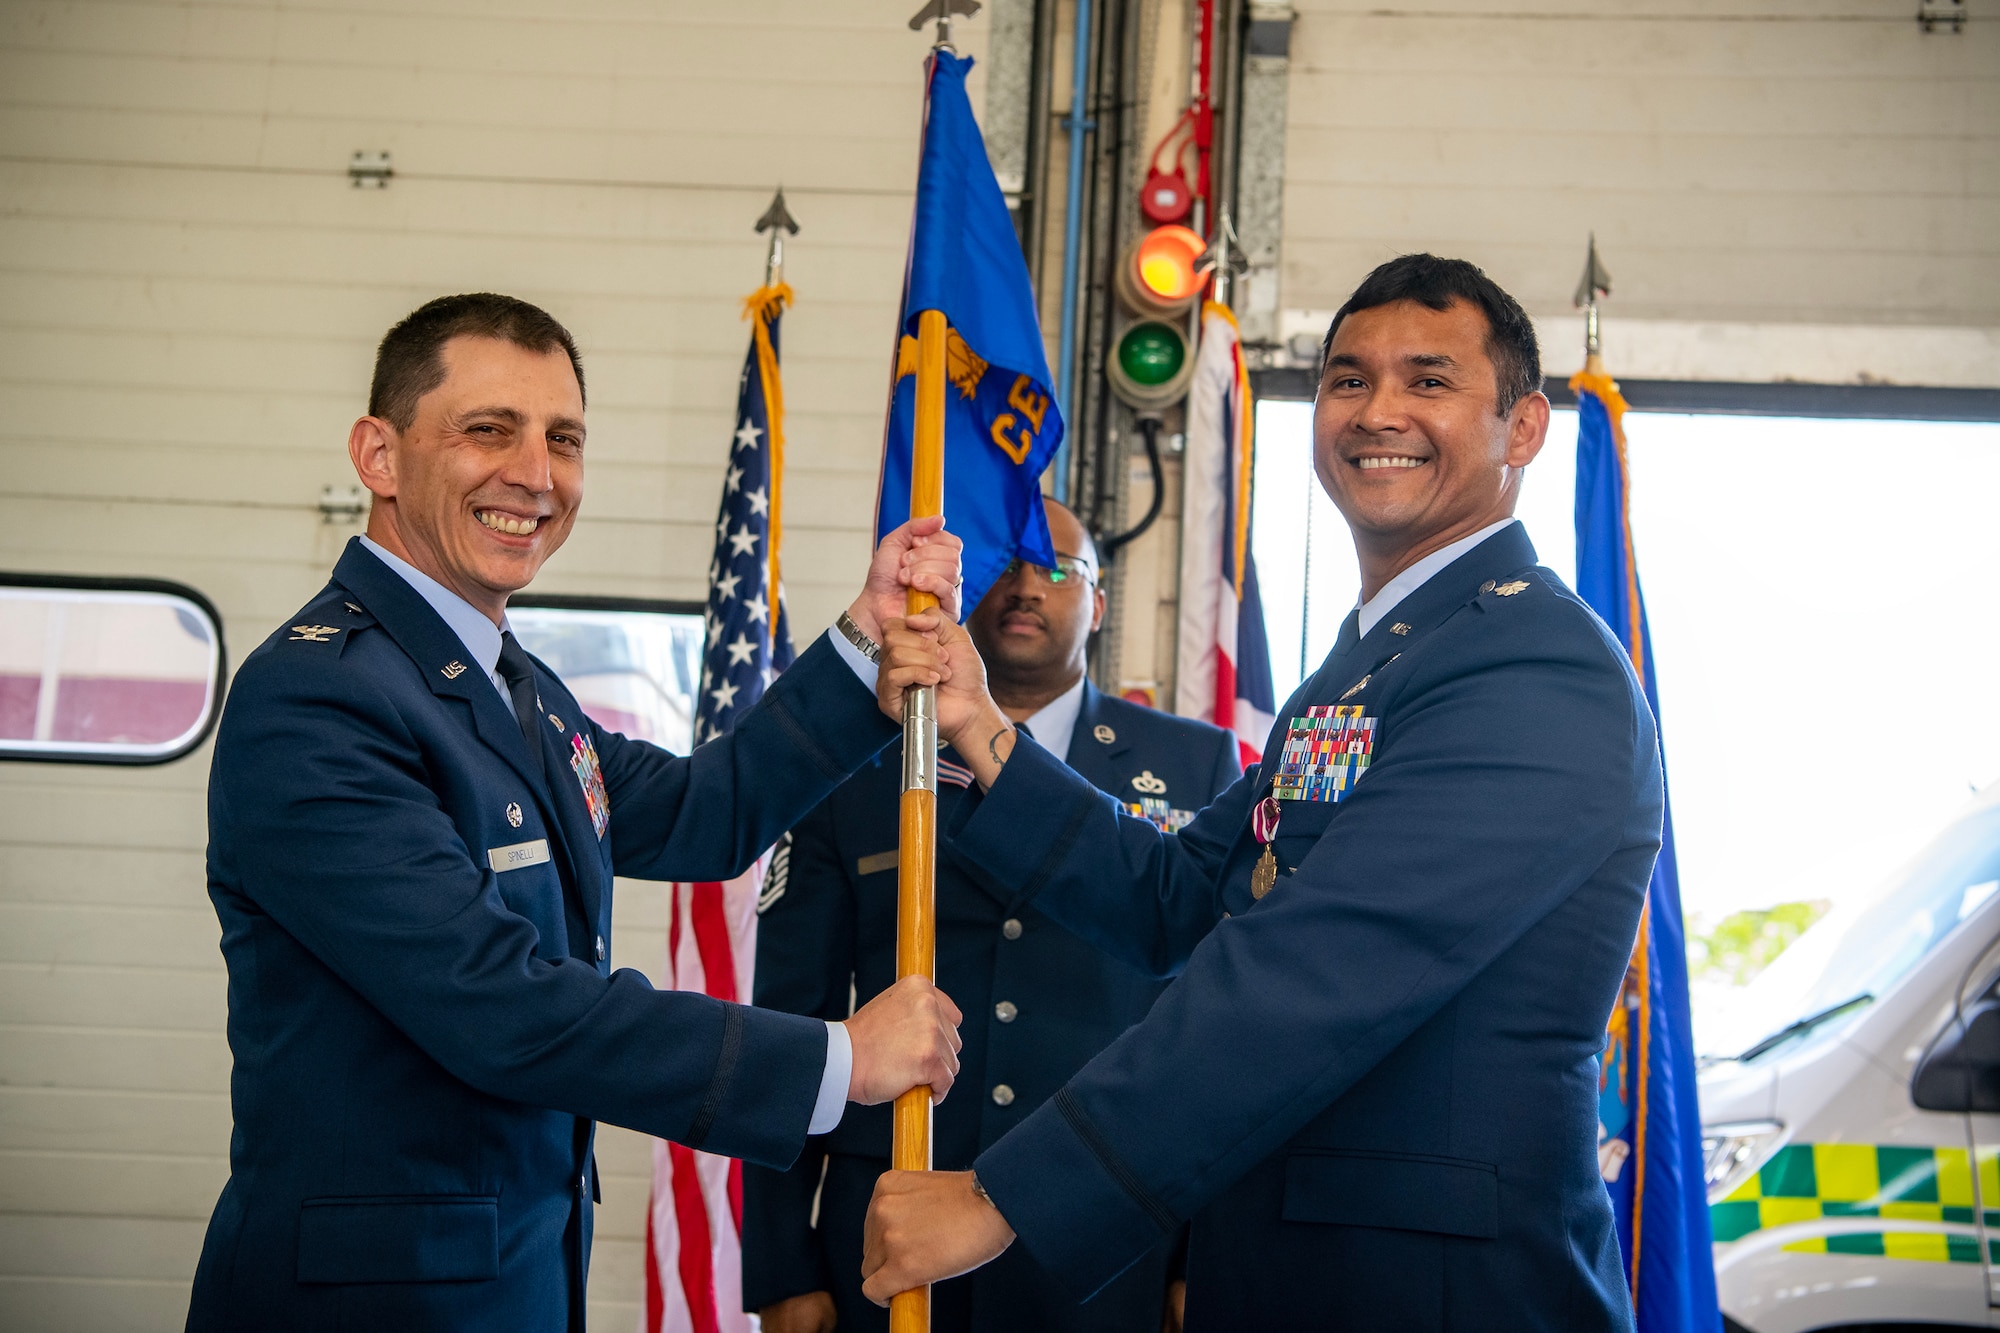 U.S. Air Force Col. Edward Spinelli, left,  422d Air Base Group commander, receives the 422d Civil Engineer Squadron guidon from Lt. Col. Jethro Sadora, 422d CES outgoing commander, during a change of command ceremony at RAF Croughton, England, June 15, 2023. During his command, Saddora led 155 personnel and was responsible for the construction, maintenance, fire prevention and environmental protection for real property and infrastructure encompassing 787 facilities, spanning 1,205 acres valued at one billion dollars. (U.S. Air Force photo by Staff Sgt. Eugene Oliver)